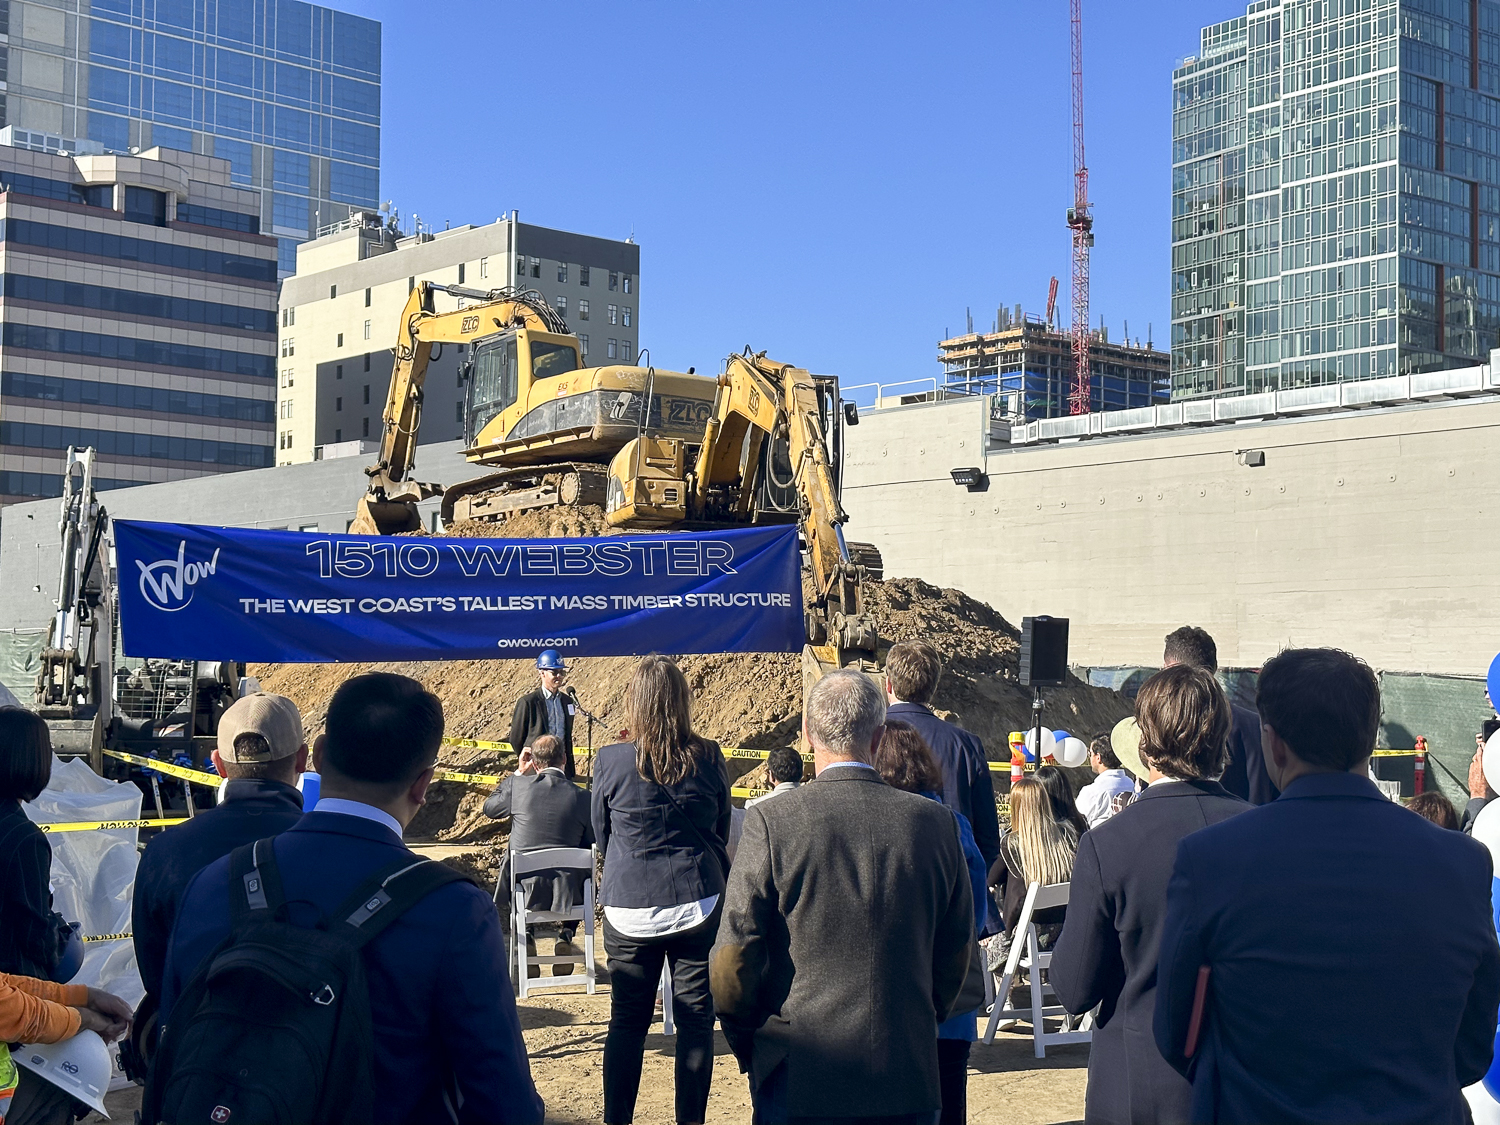 Director of Development for oWow Jeremy Harris speaking during the groundbreaking ceremony of 1510 Webster Street, image by author